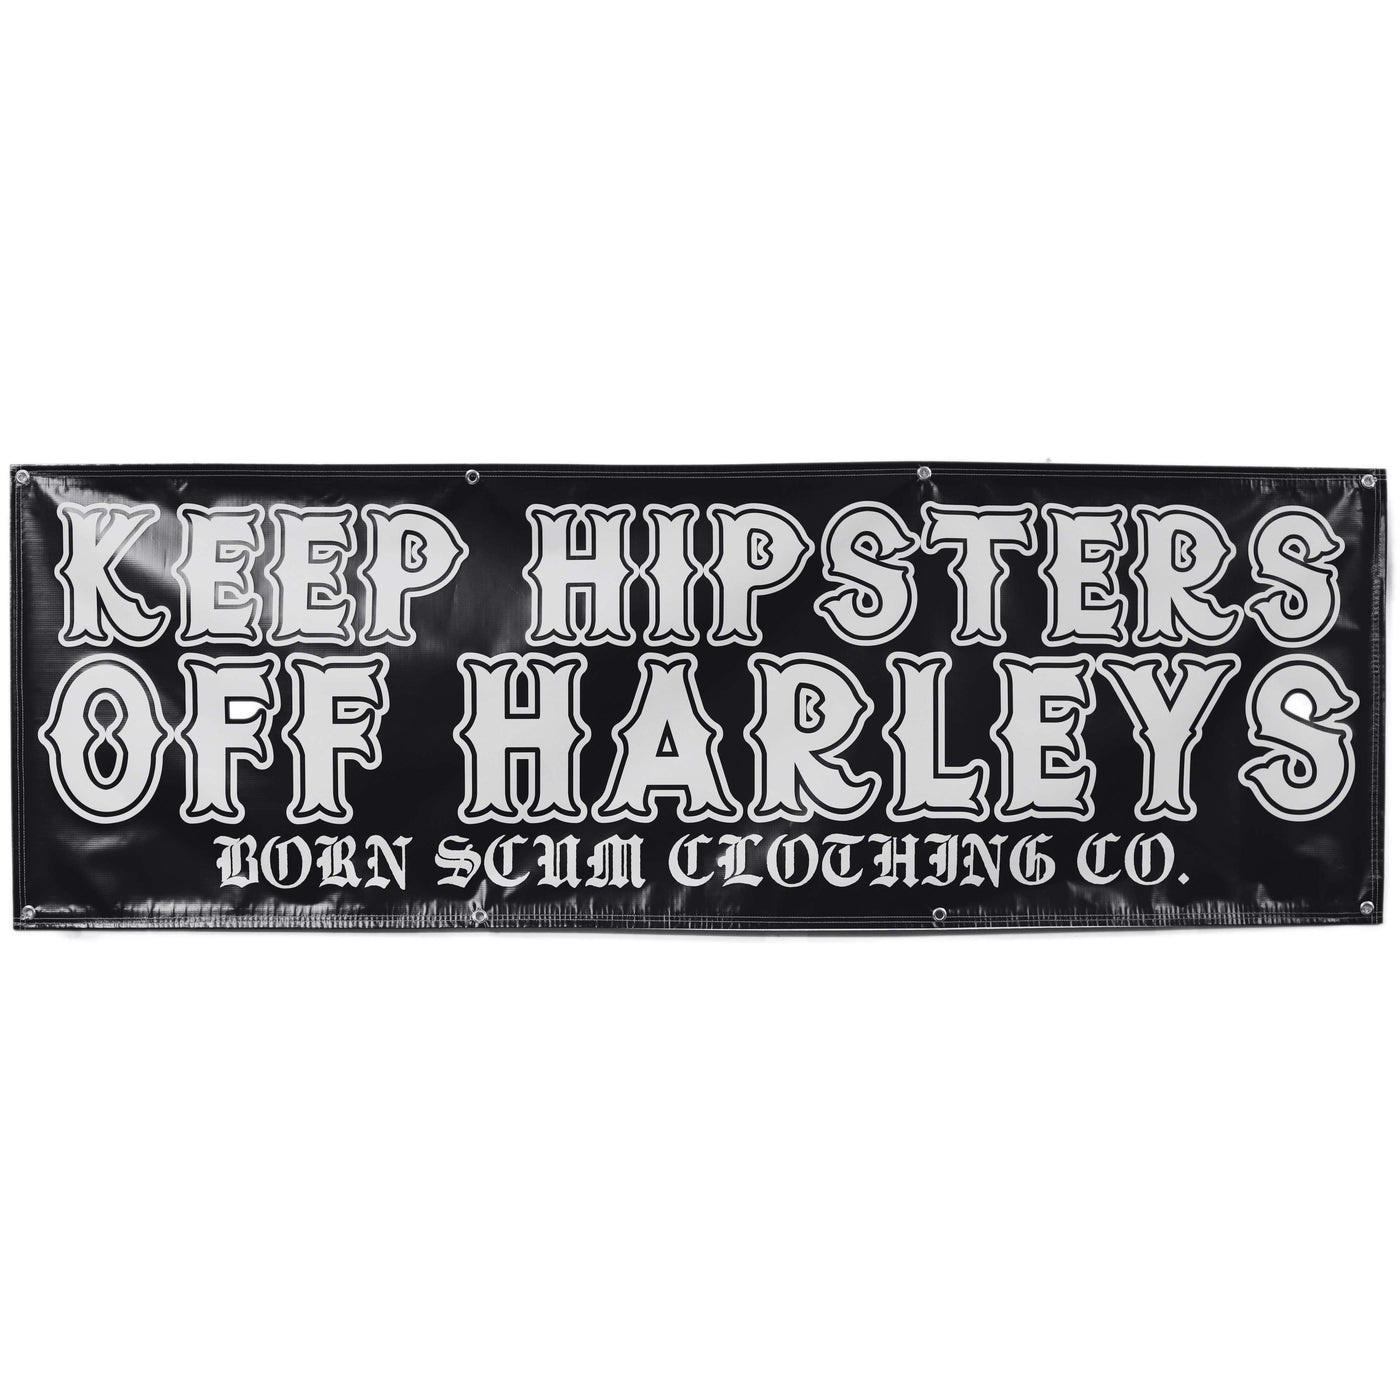 KEEP HIPSTERS OFF HARLEYS BANNER - Born Scum Clothing Co